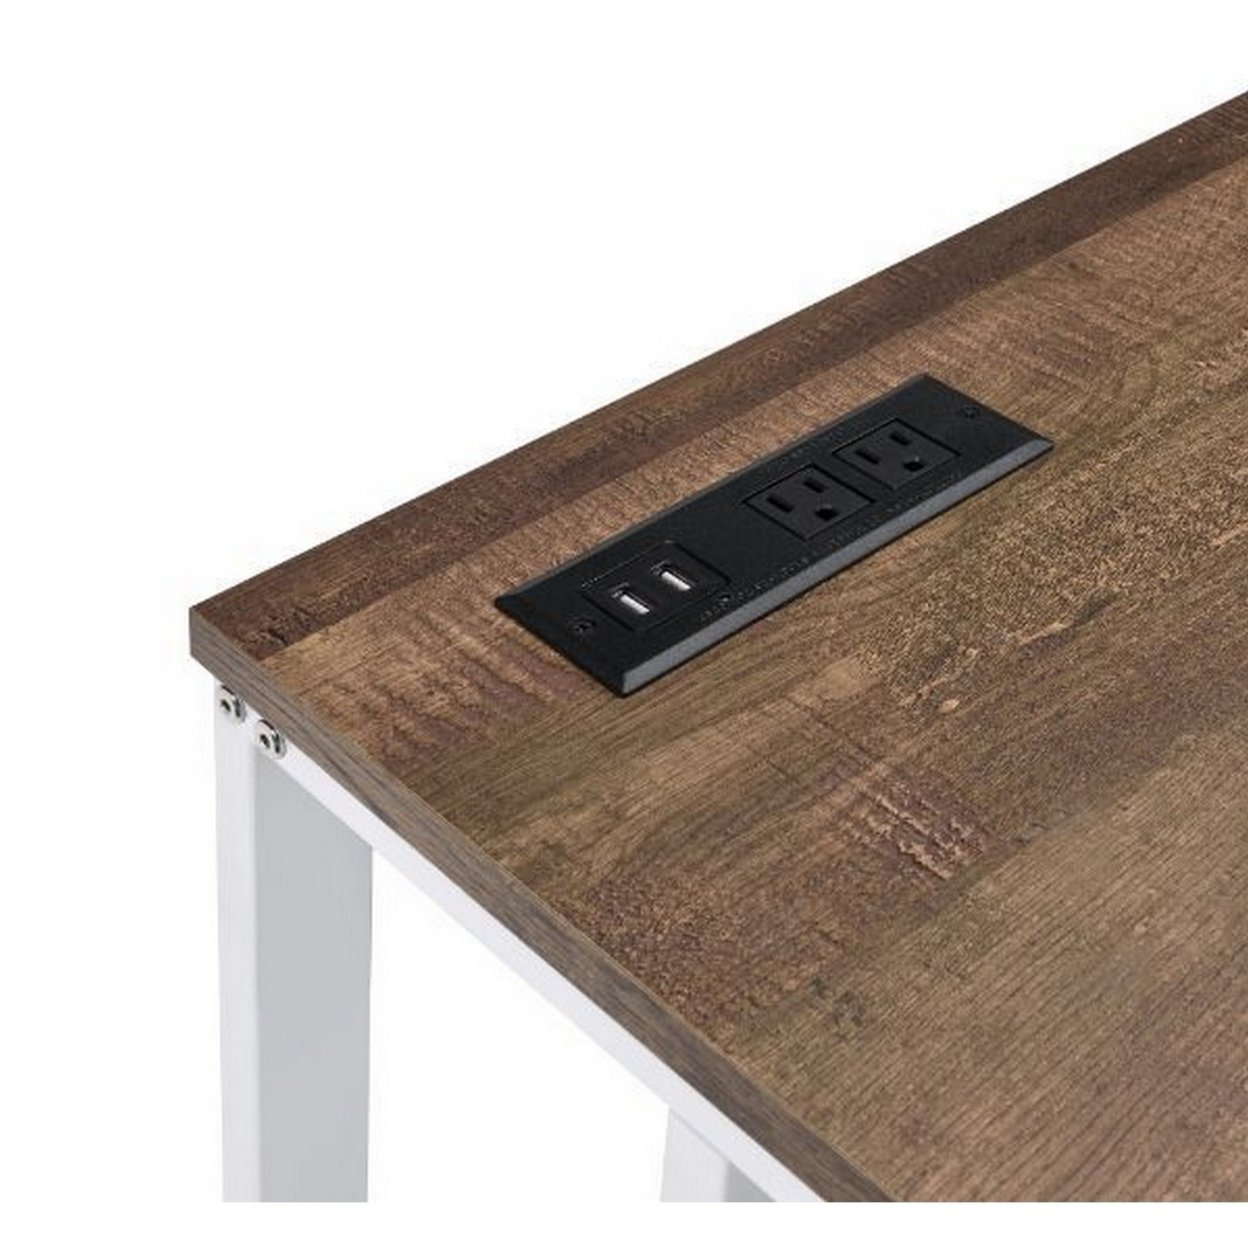 Writing Desk With Wooden Top And Built In USB Port, Brown And White- Saltoro Sherpi